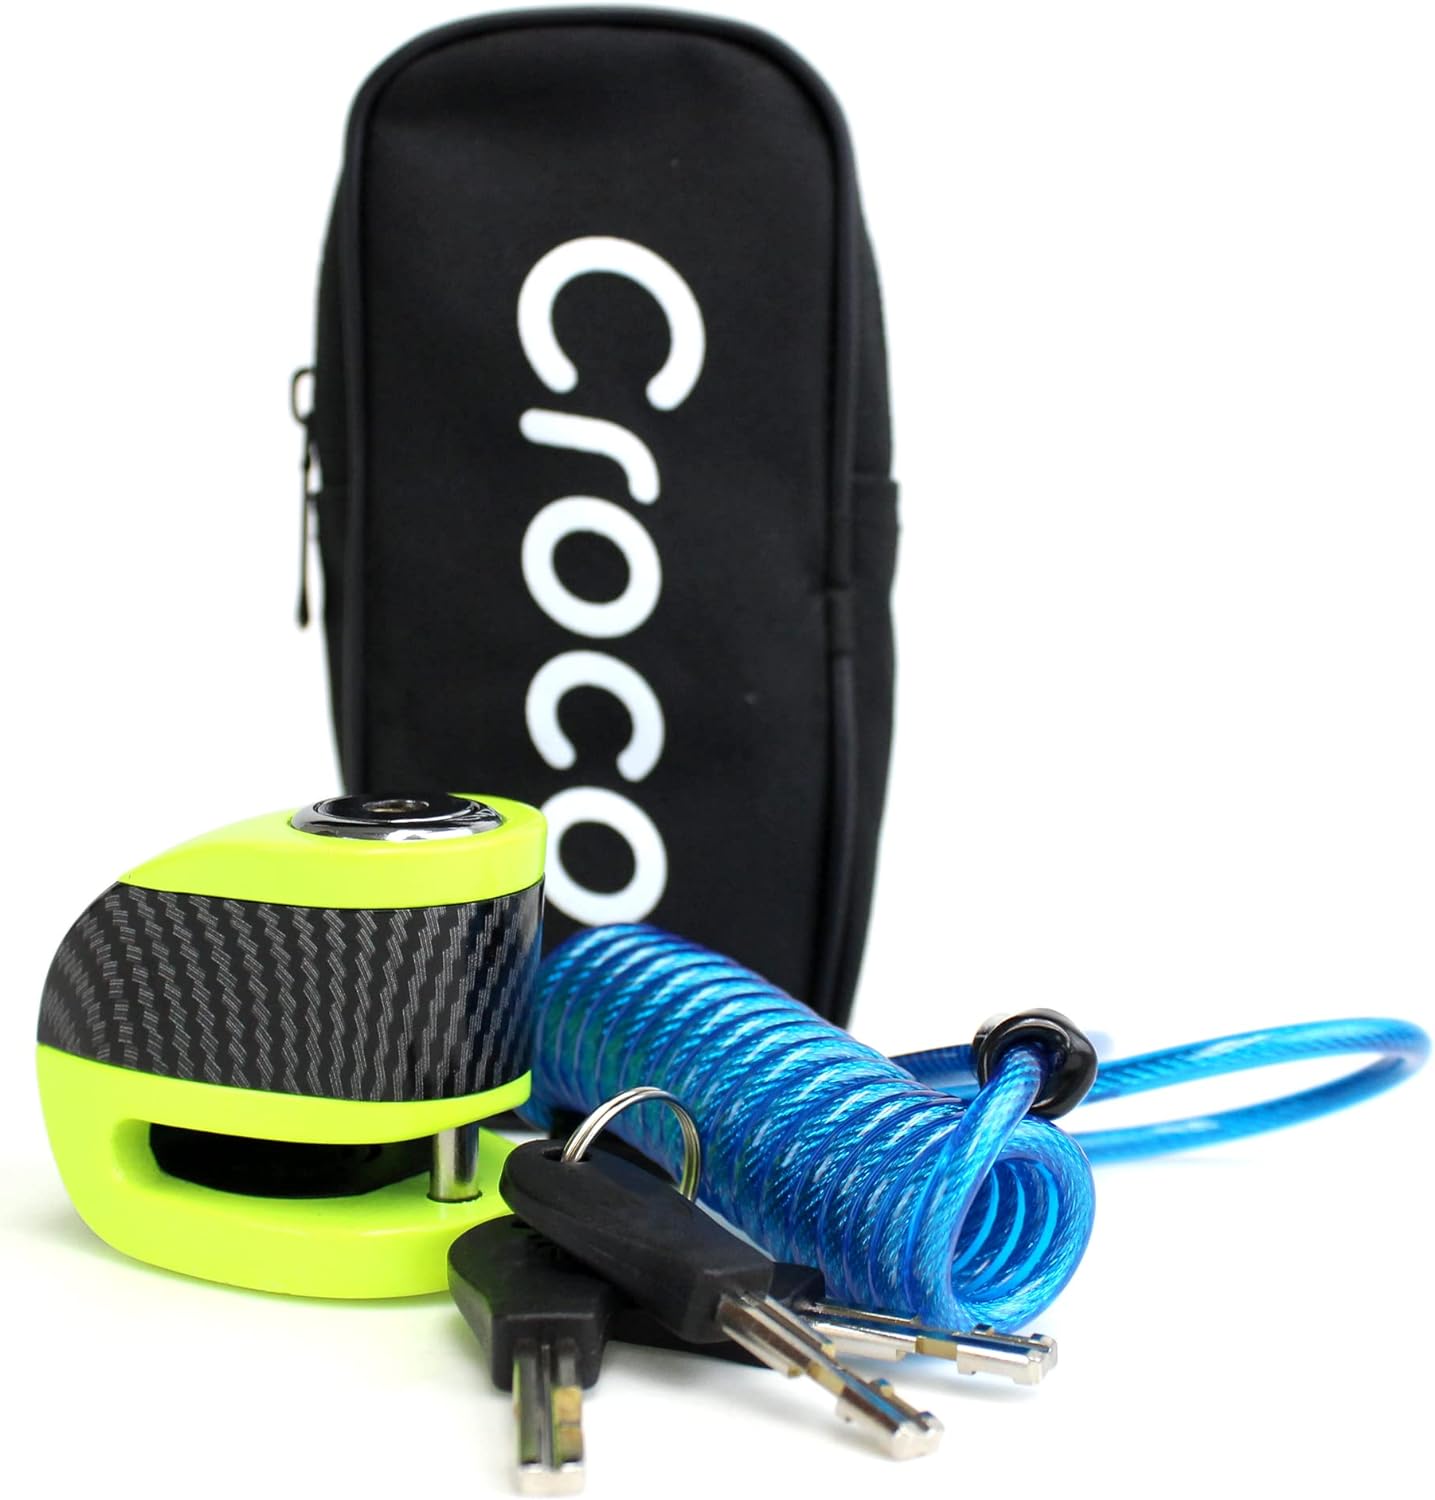 This image showcases a security product setup that includes a vibrant green and black alarm lock, a coiled blue security cable, and a black carrying pouch marked with the brand "Croco". The color contrast between the bright green lock, the blue cable, and the black pouch makes the items stand out, indicating a strong visual marketing strategy to make the security features of the product appealing to potential buyers